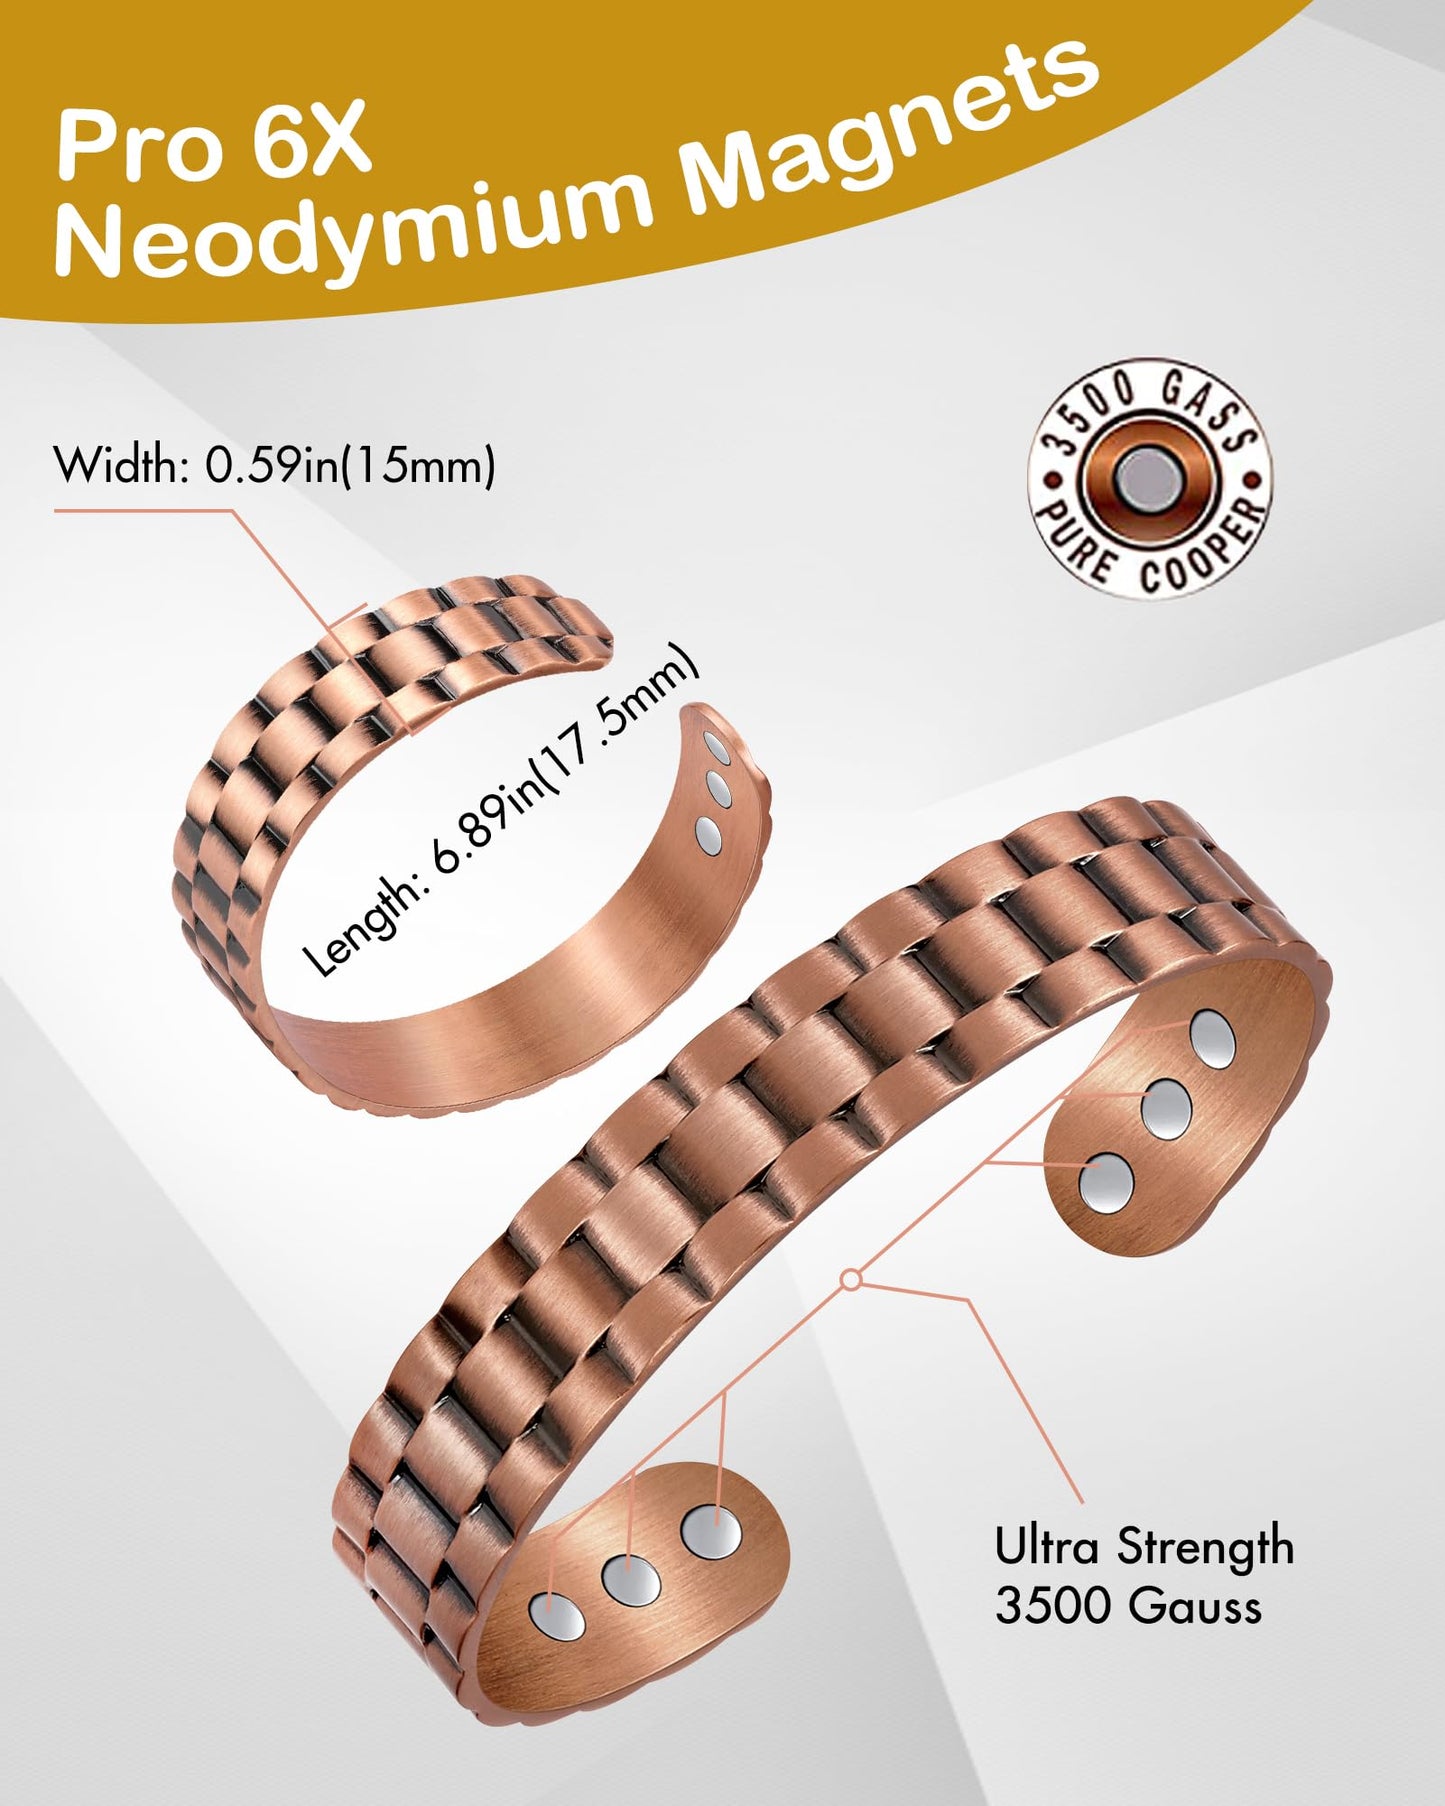 Feraco Copper Magnetic Bracelets for Men Women with Healing Magnets, Tree of Life Pattern, 99.99% Pure Solid Copper Therapy Cuff Bangle, Health Jewelry Gift